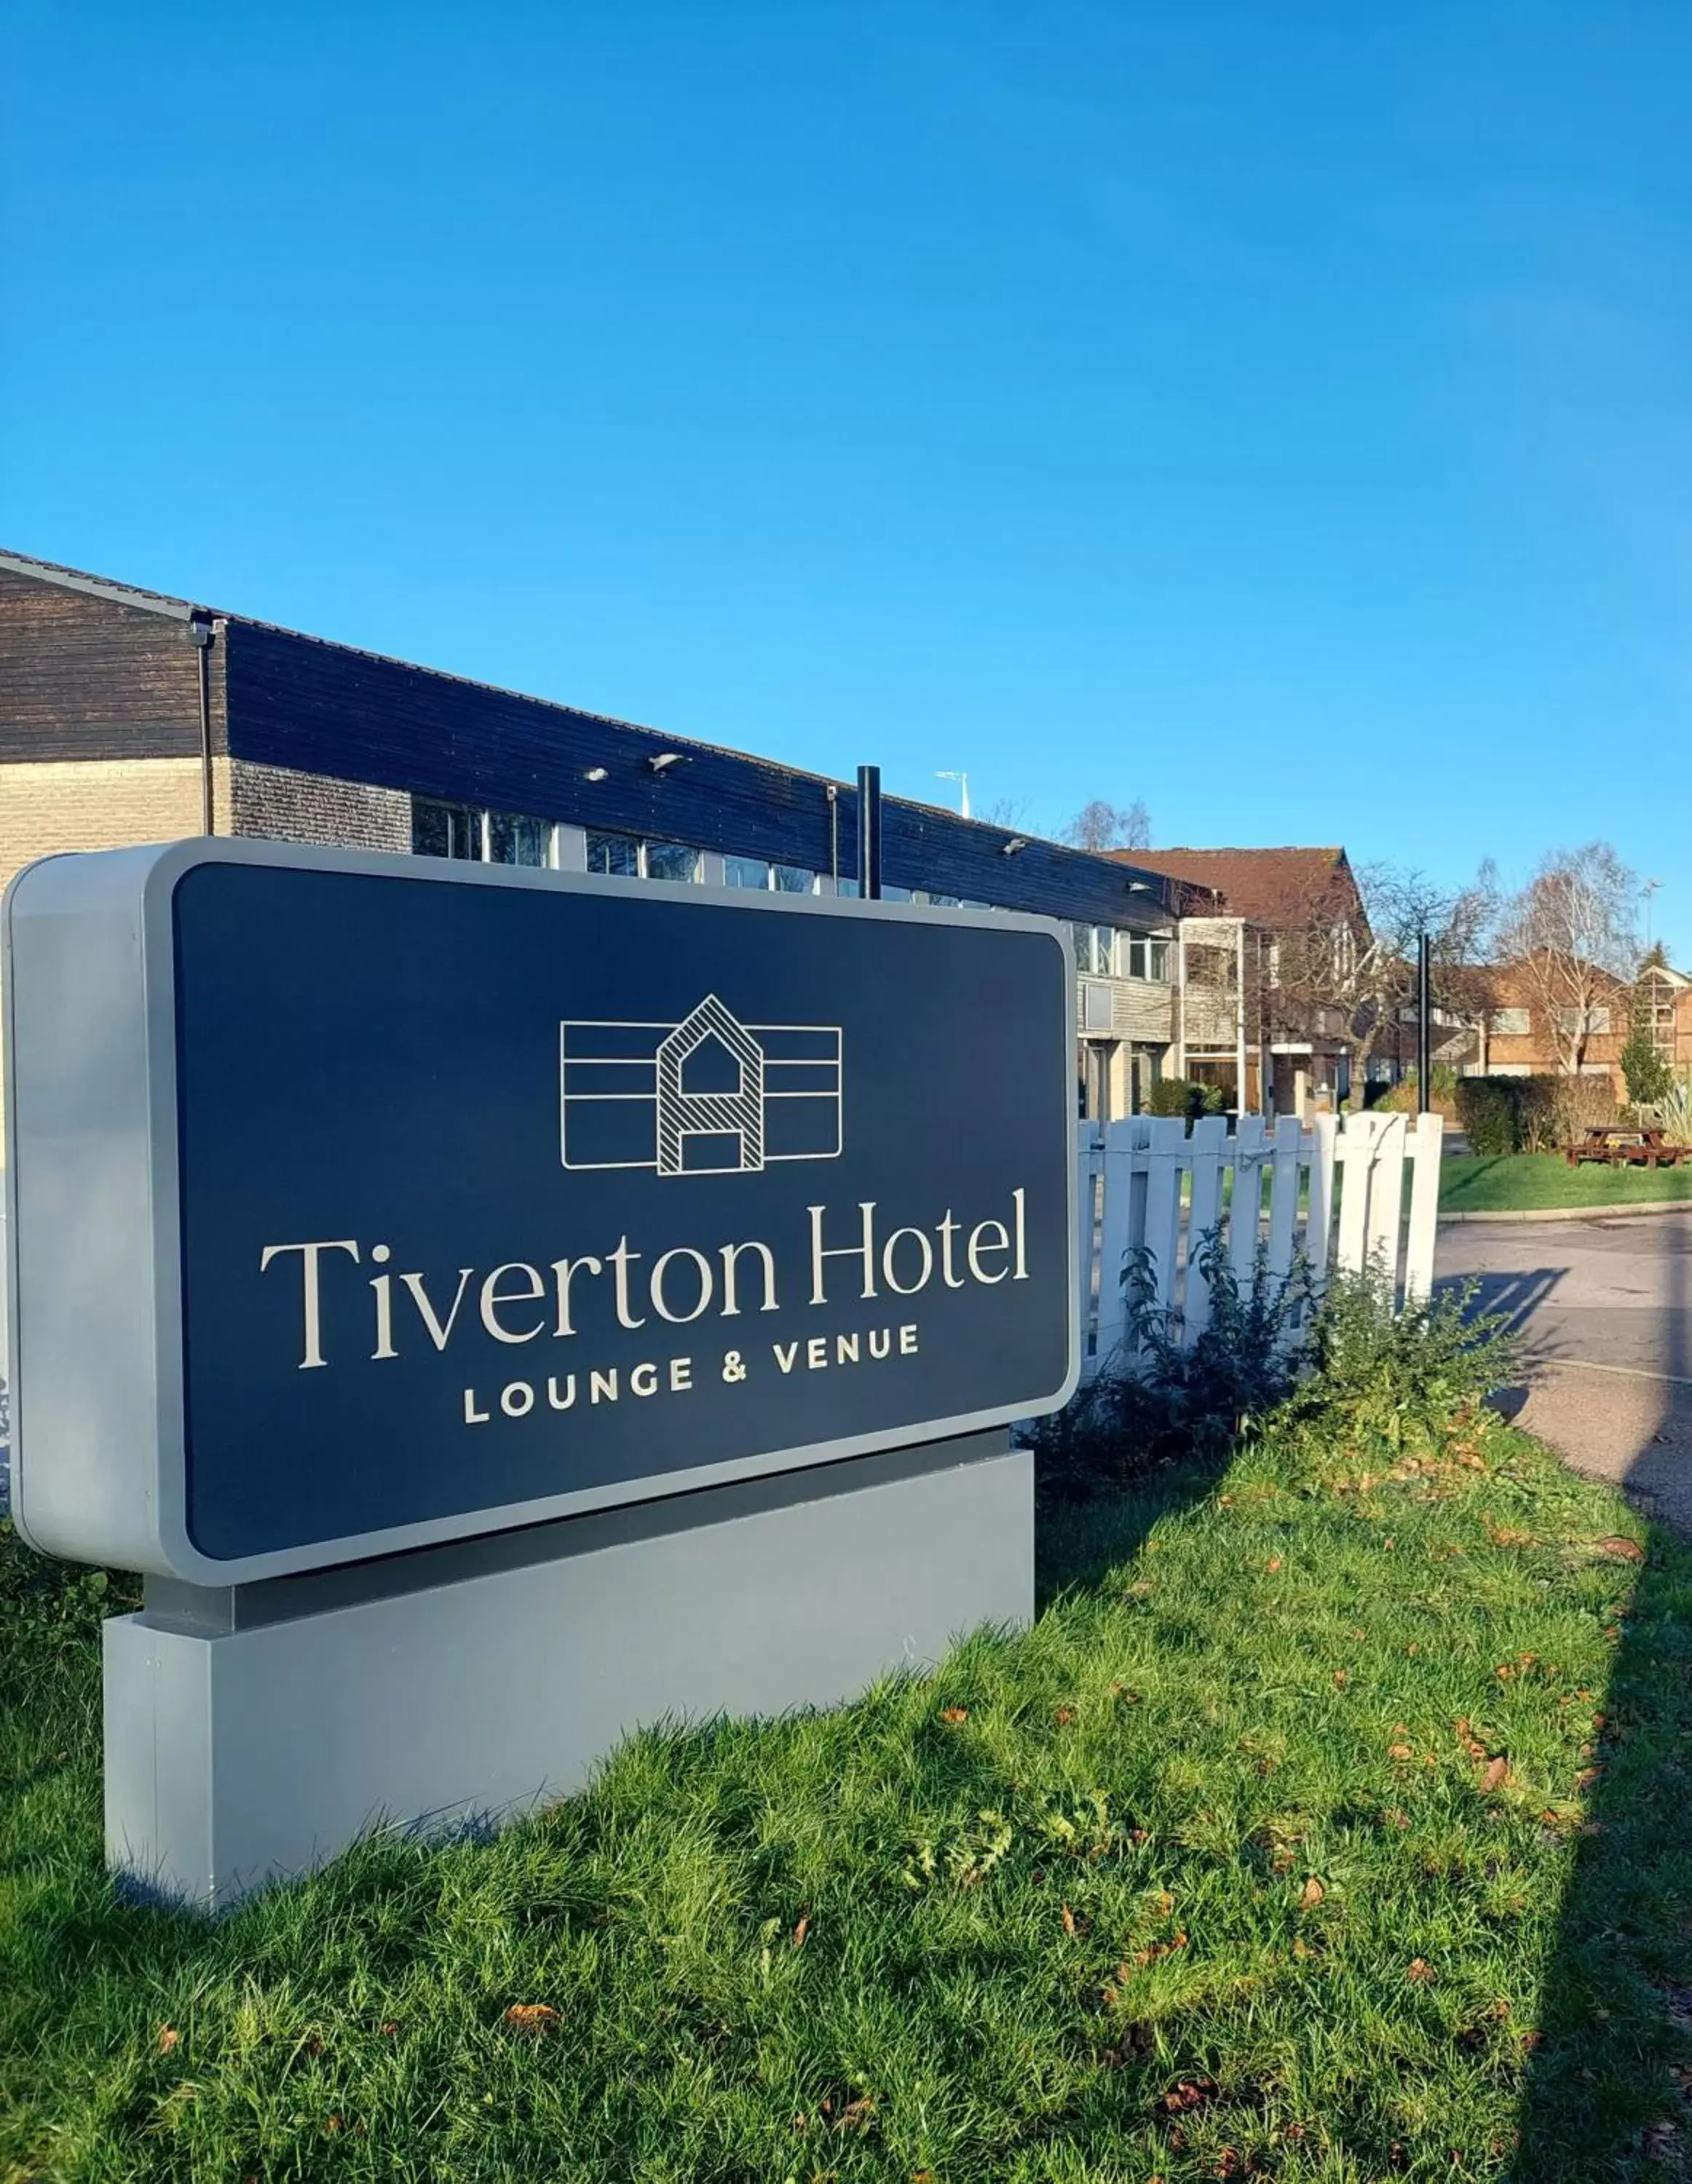 Property Building in Tiverton Hotel Lounge & Venue formally Best Western